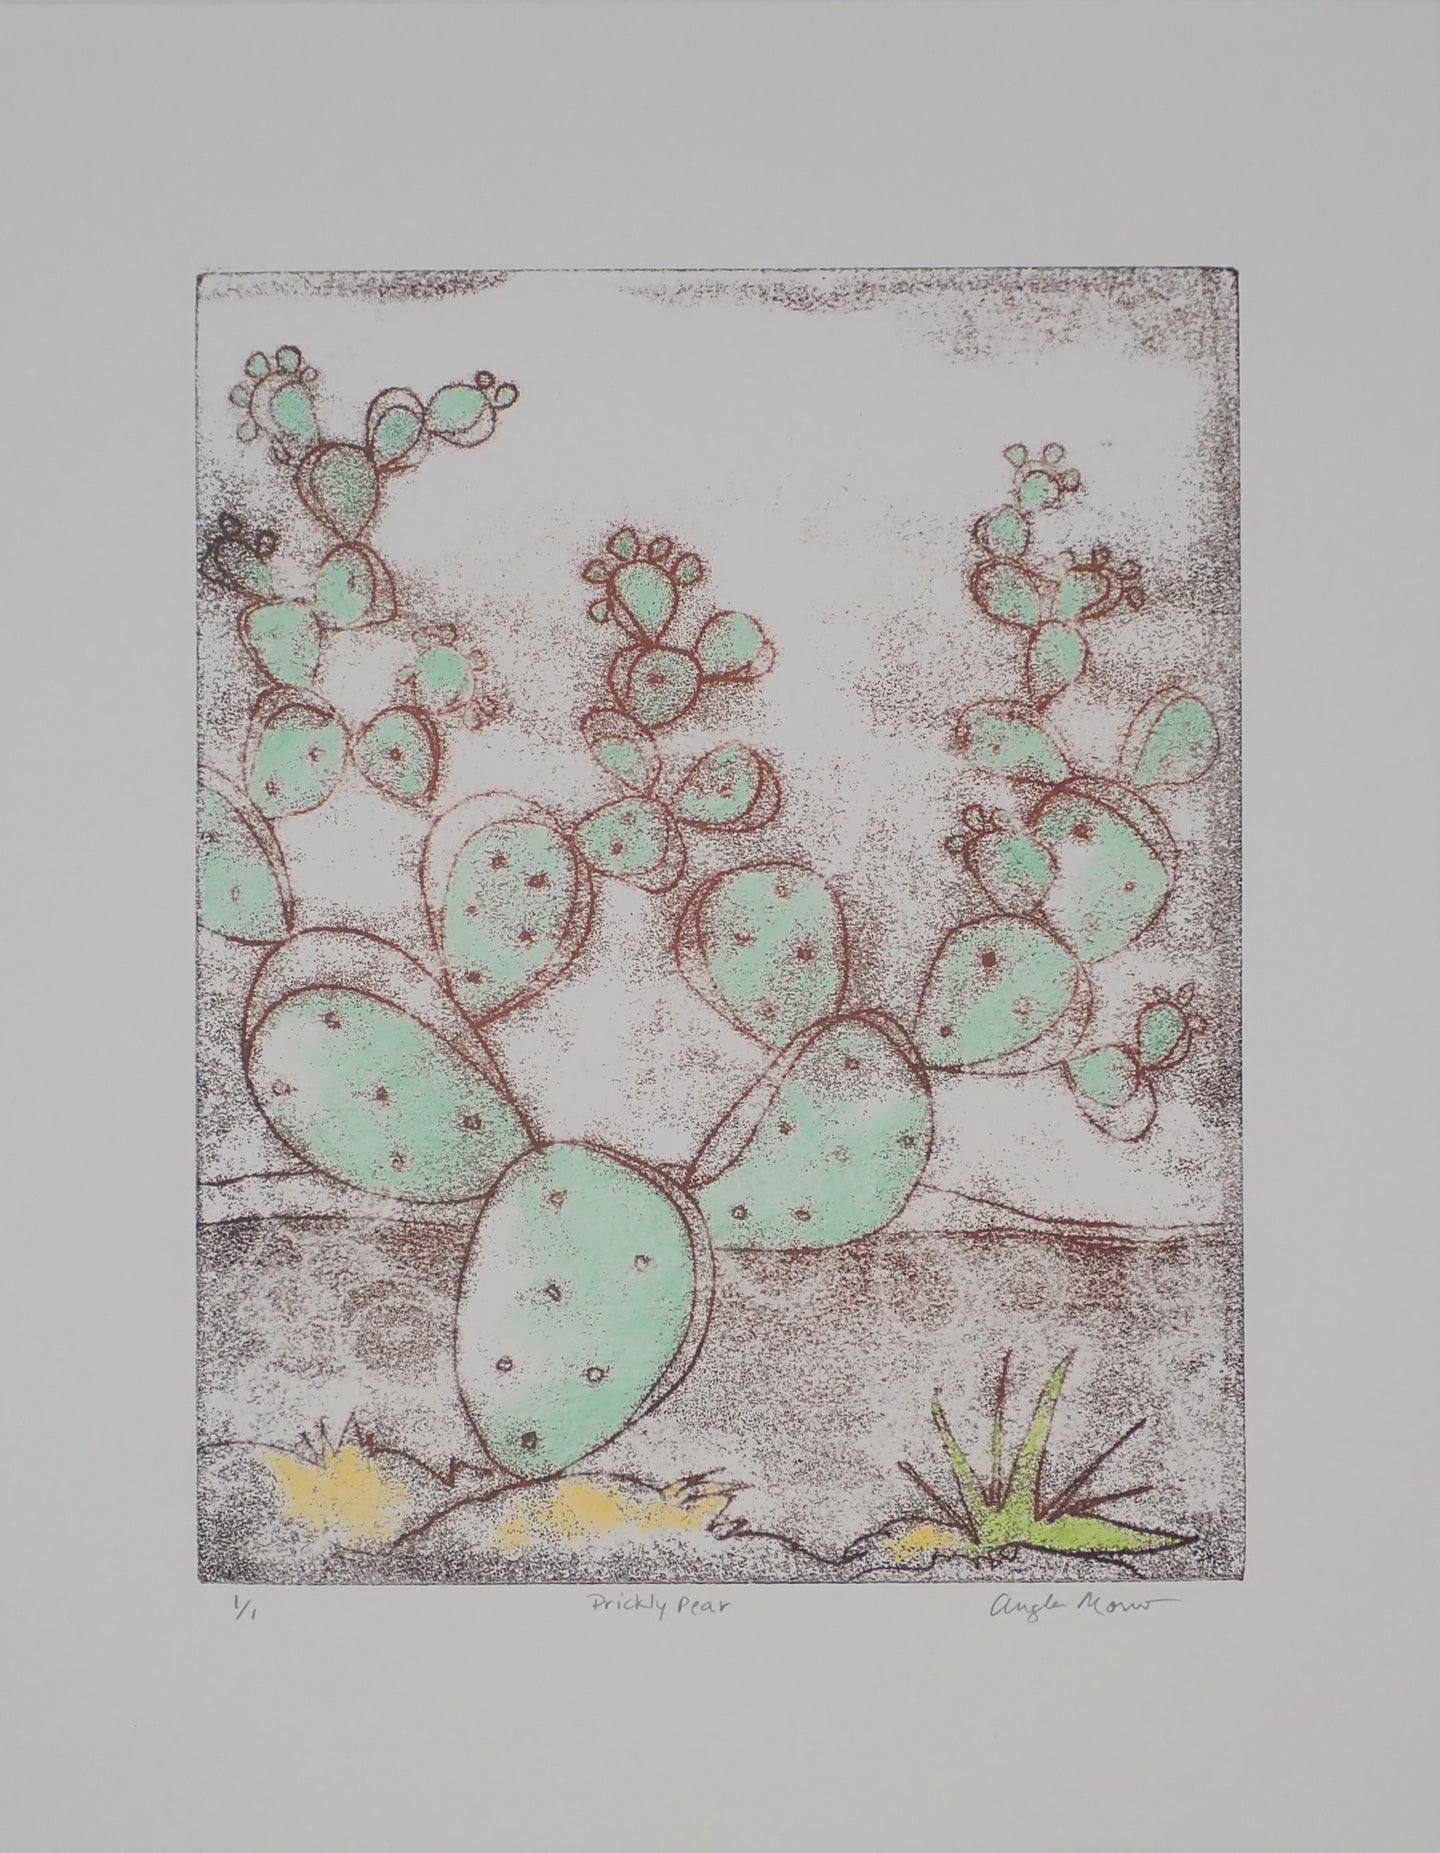 67. Prickly pear 1